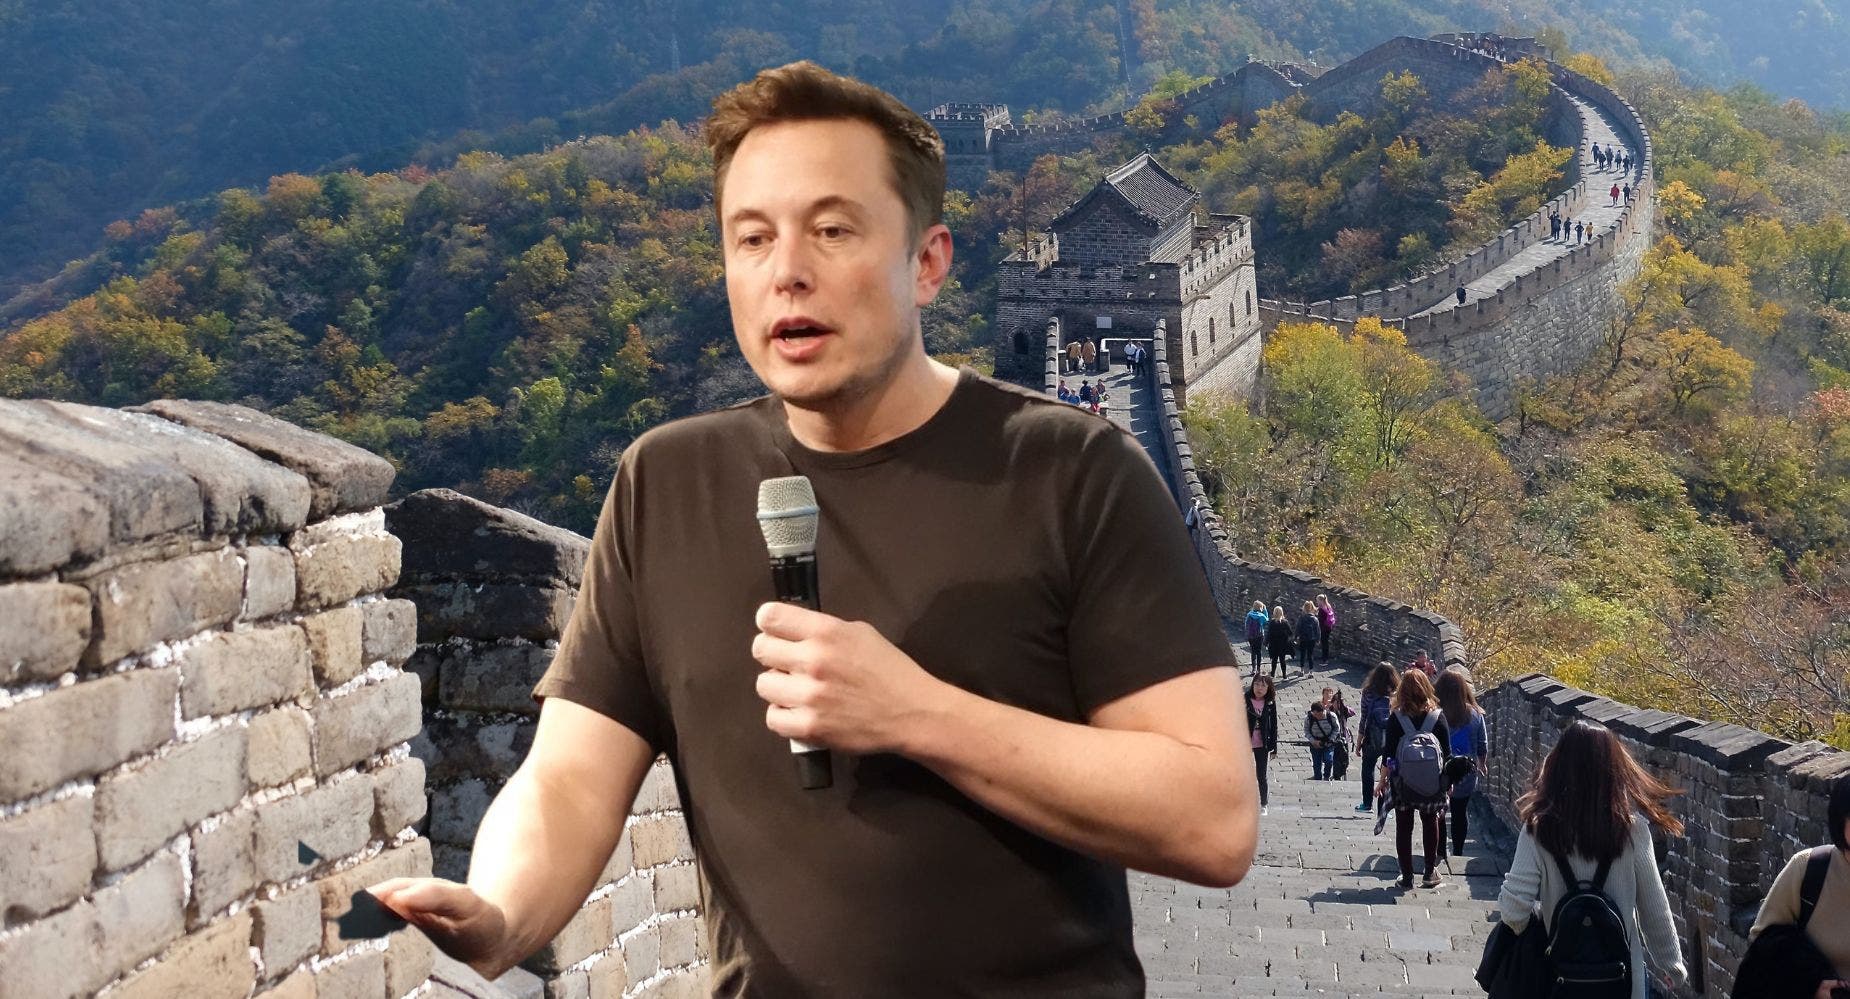 Elon Musk Offers His Suggestion For China And Taiwan: 'Figure Out A Special Administrative Zone'